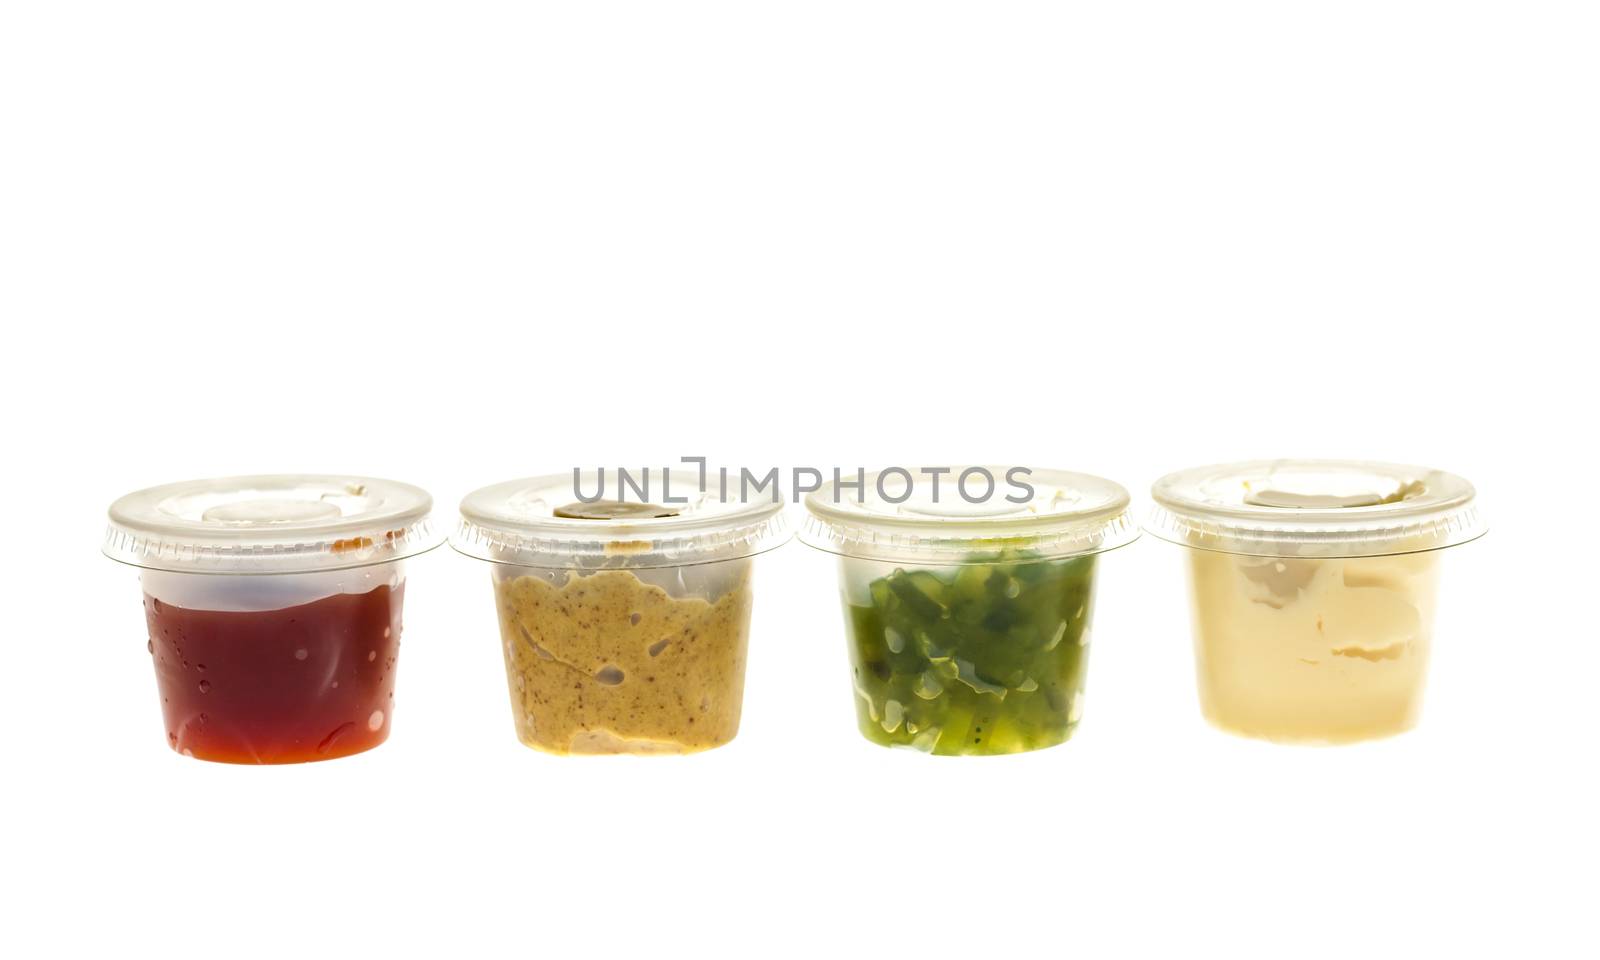 Relish mustard ketchup and mayonnaise condiments in clear containers on white background